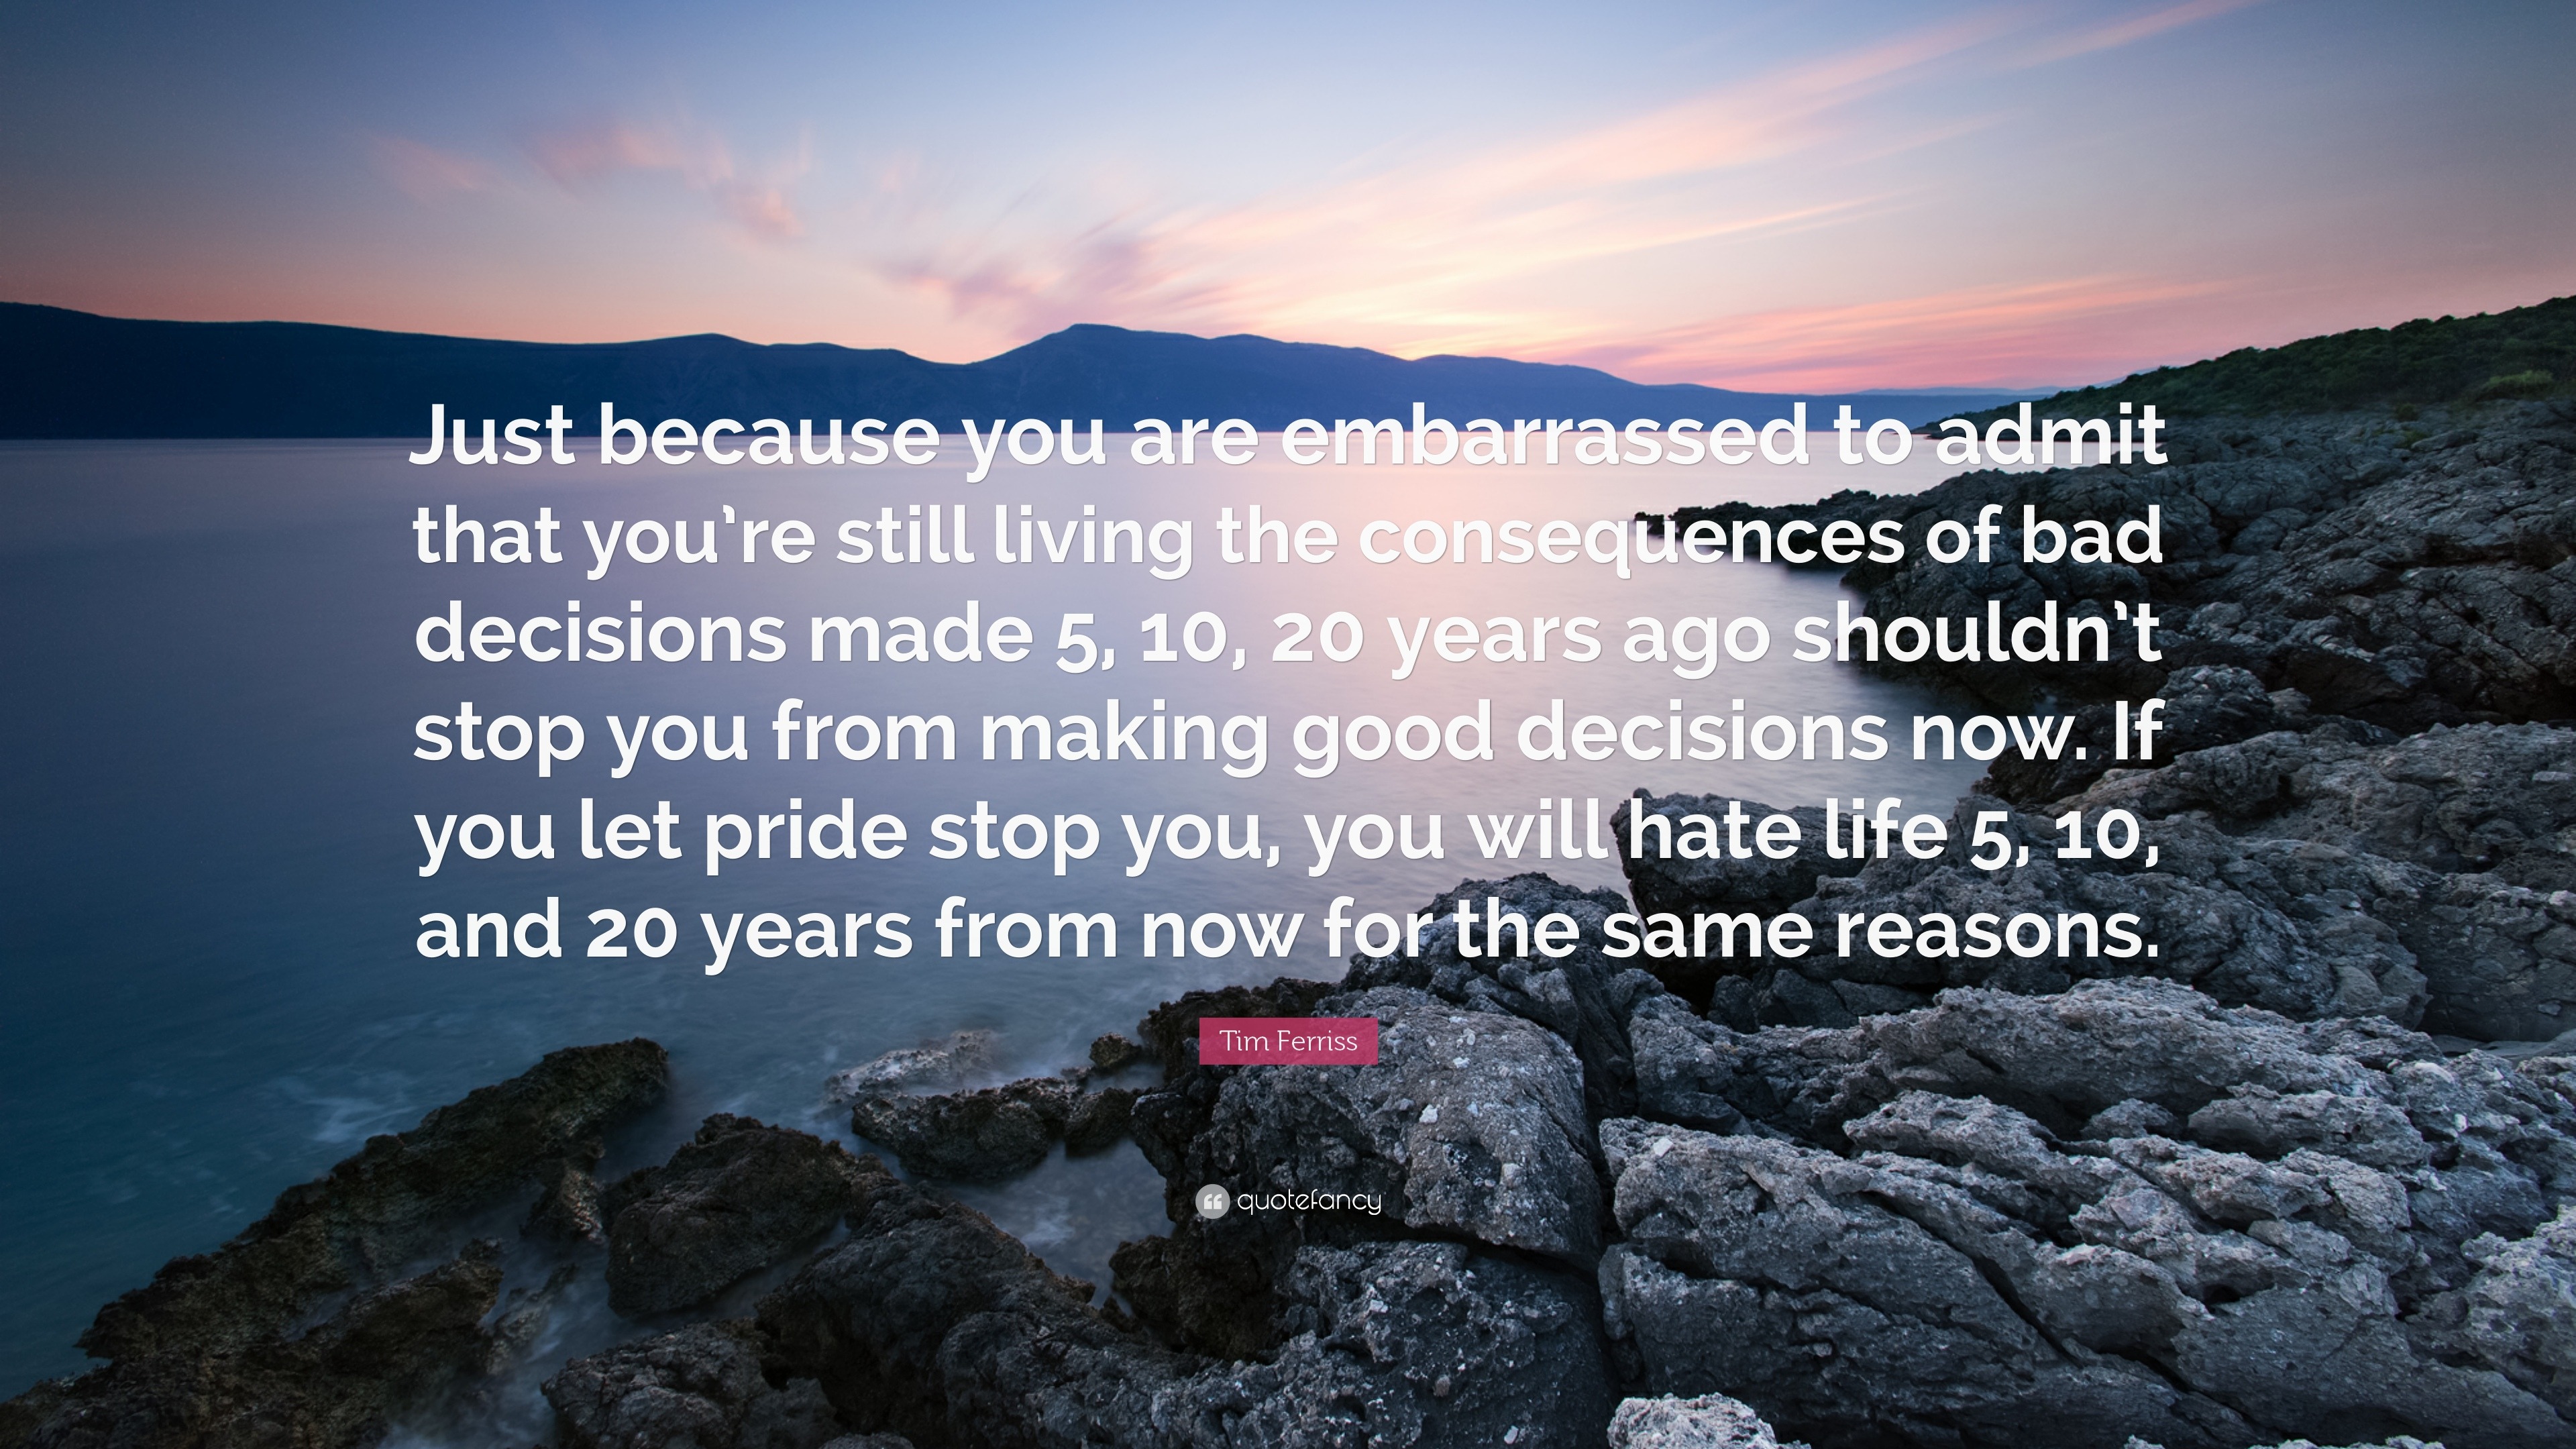 Tim Ferriss Quote “just Because You Are Embarrassed To Admit That You Re Still Living The